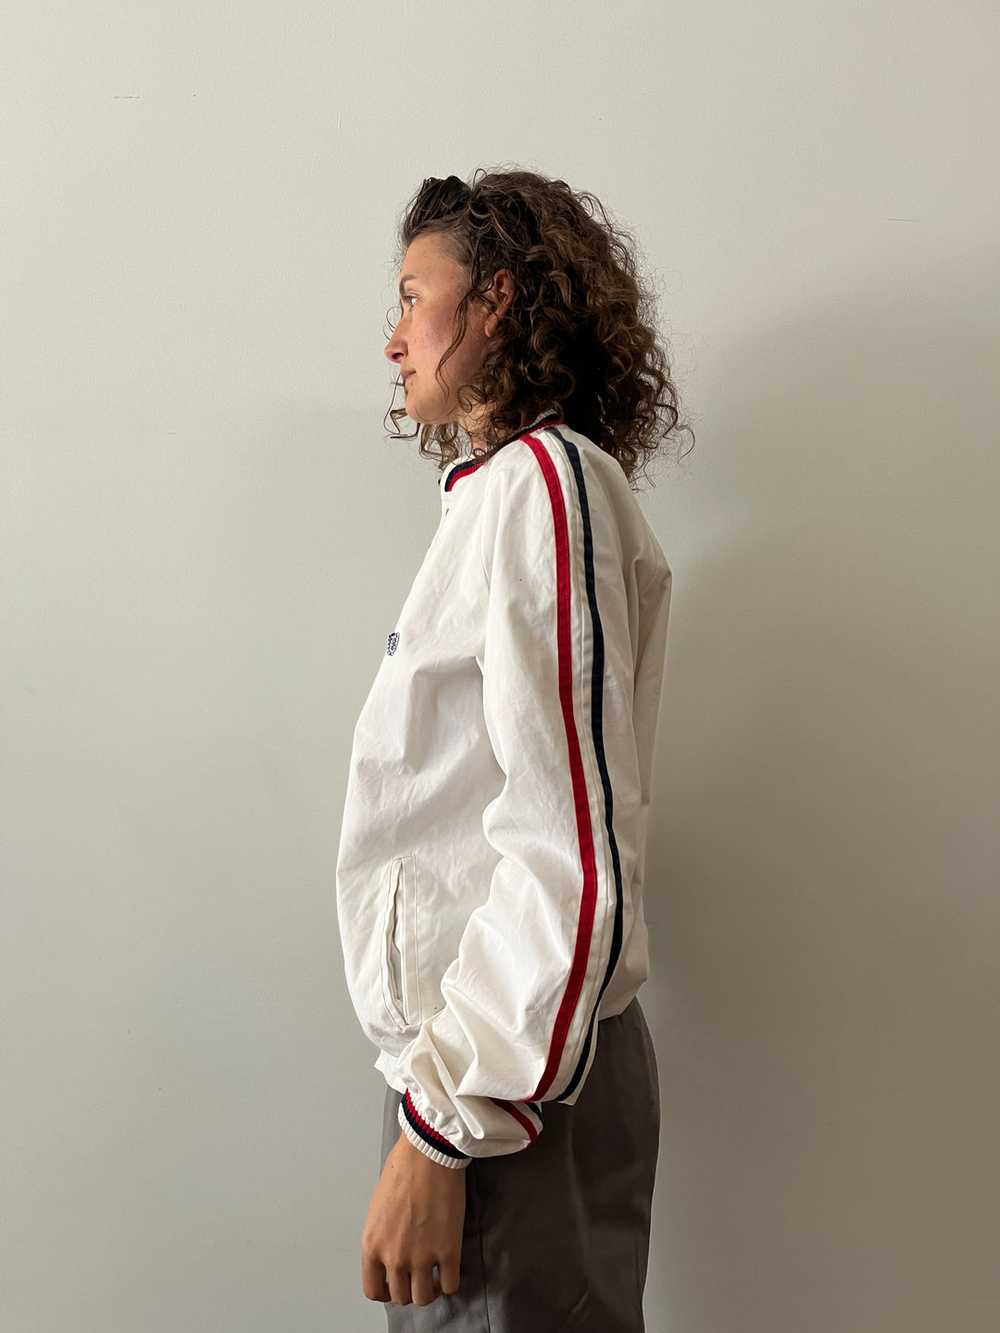 70s Fred Perry Tennis Jacket - image 4